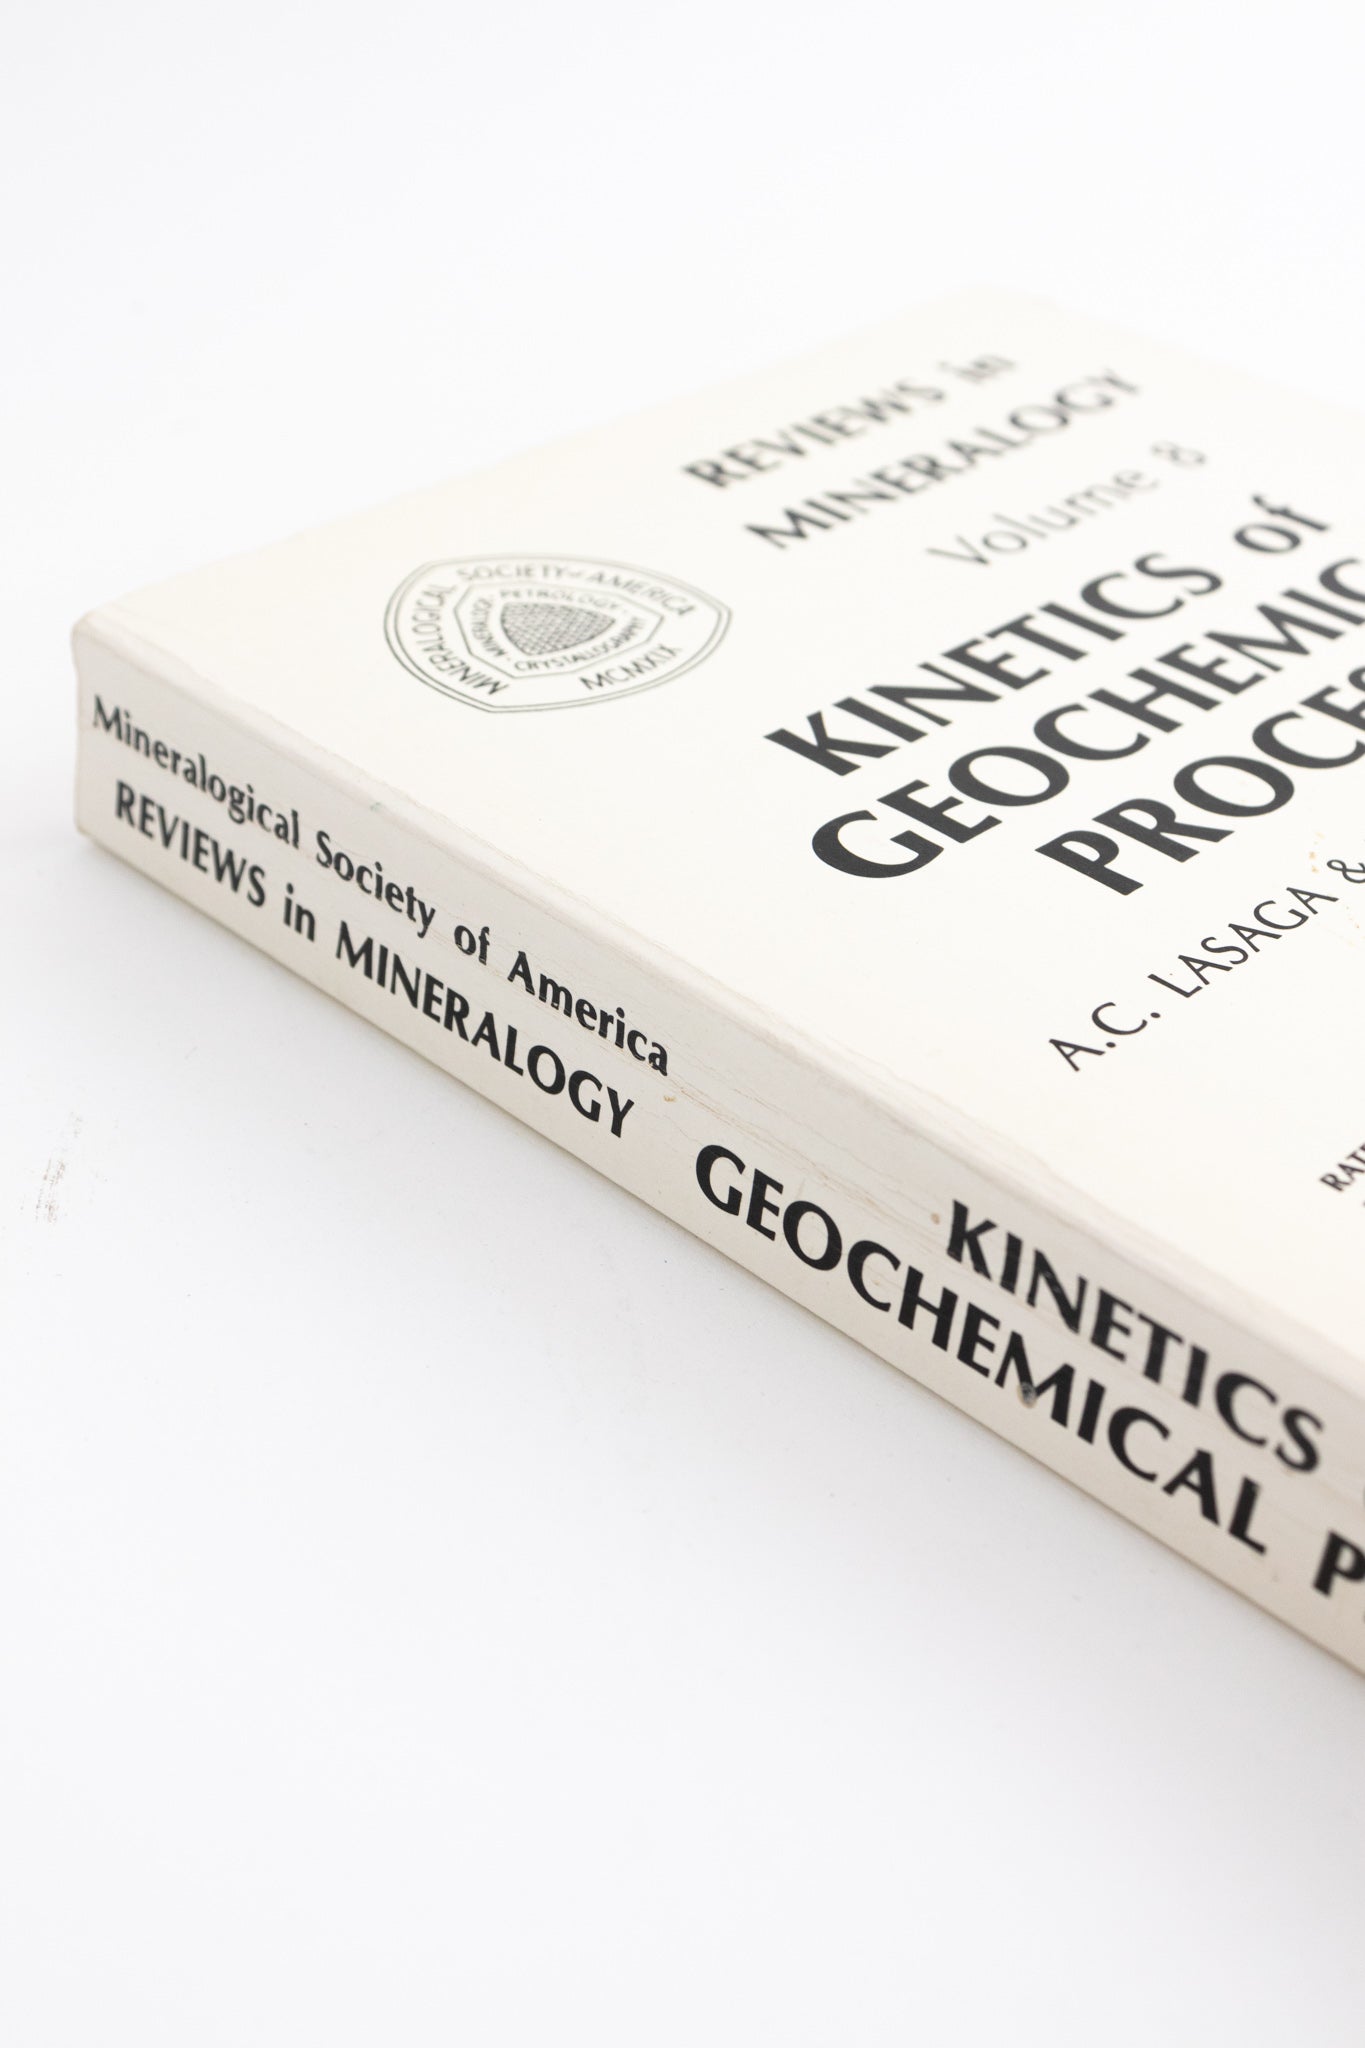 Kinetics of Geochemical Processes - Stemcell Science Shop